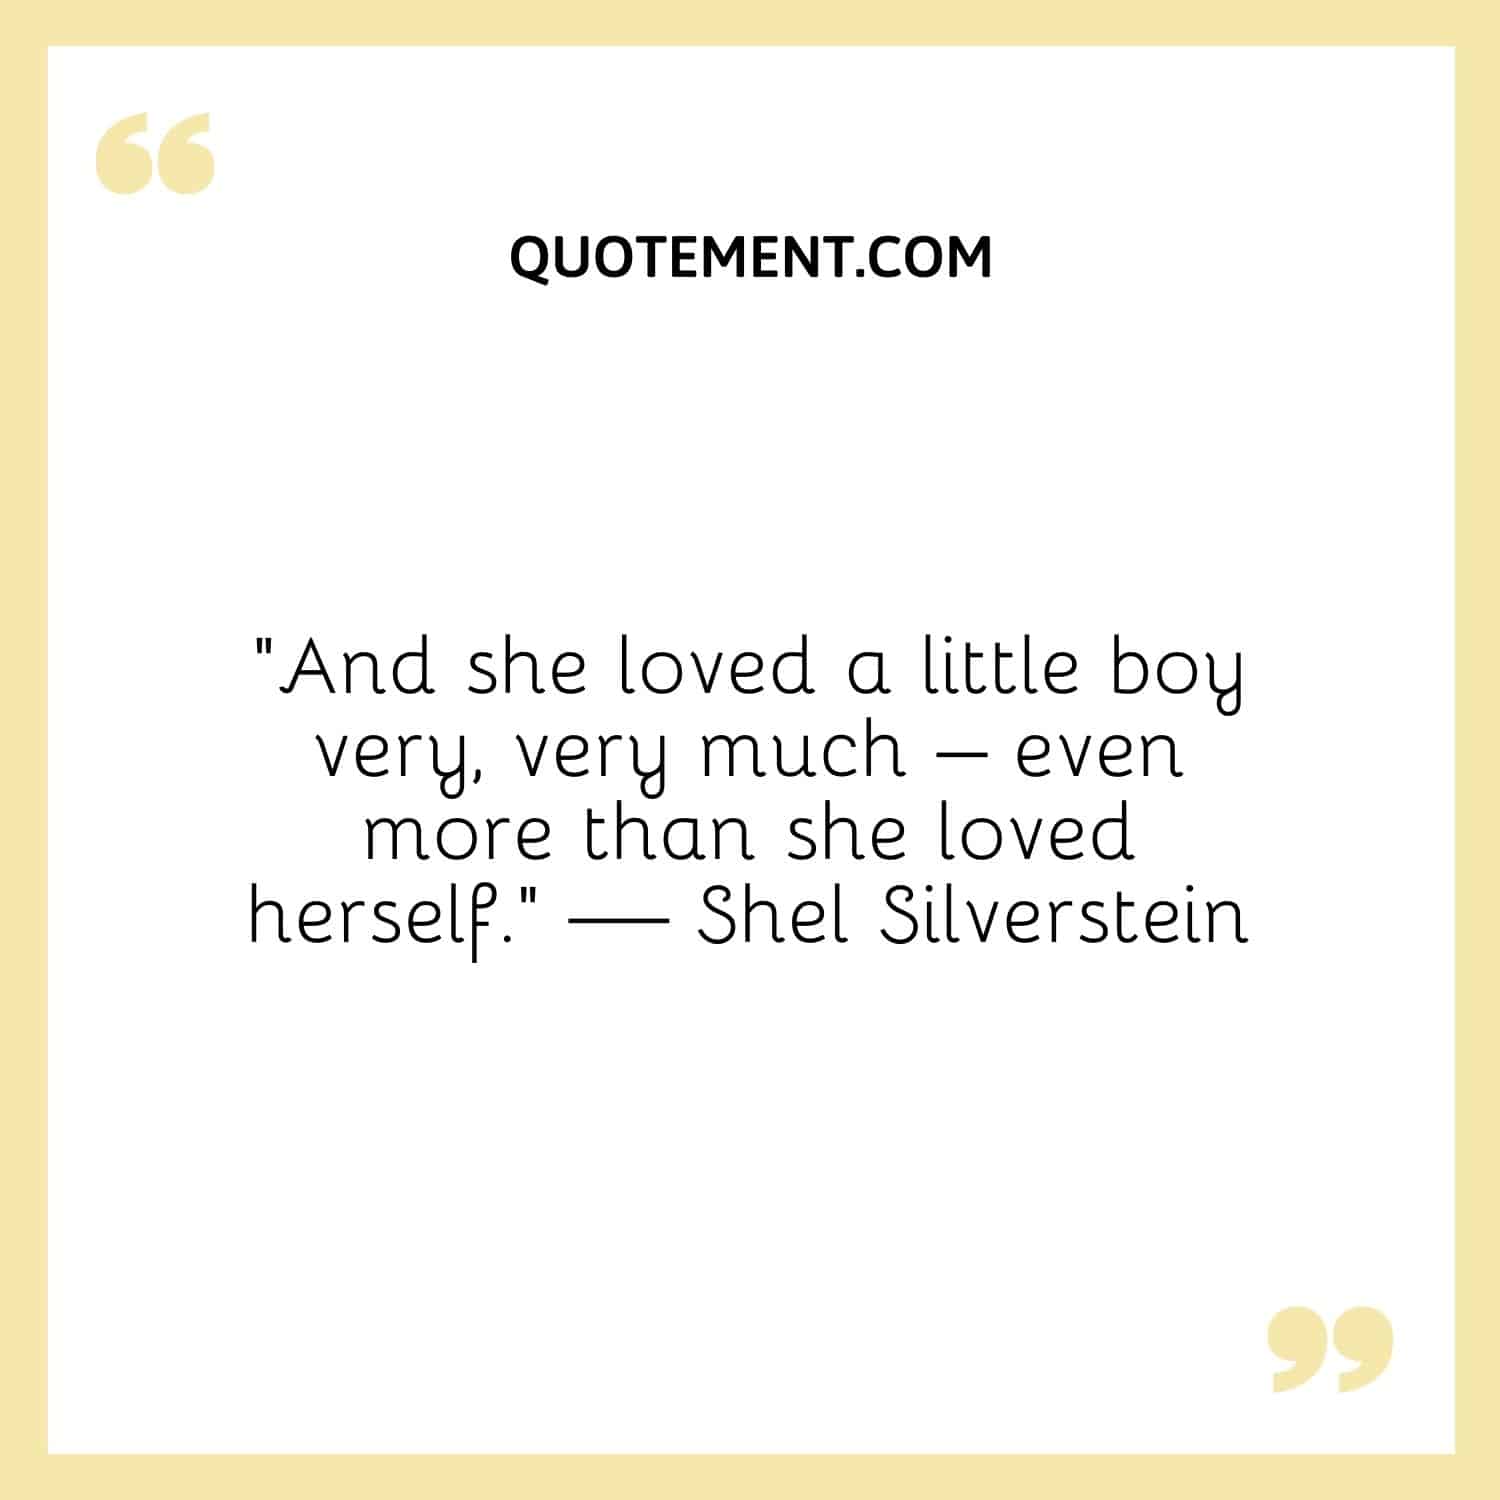 And she loved a little boy very much – even more than she loved herself.